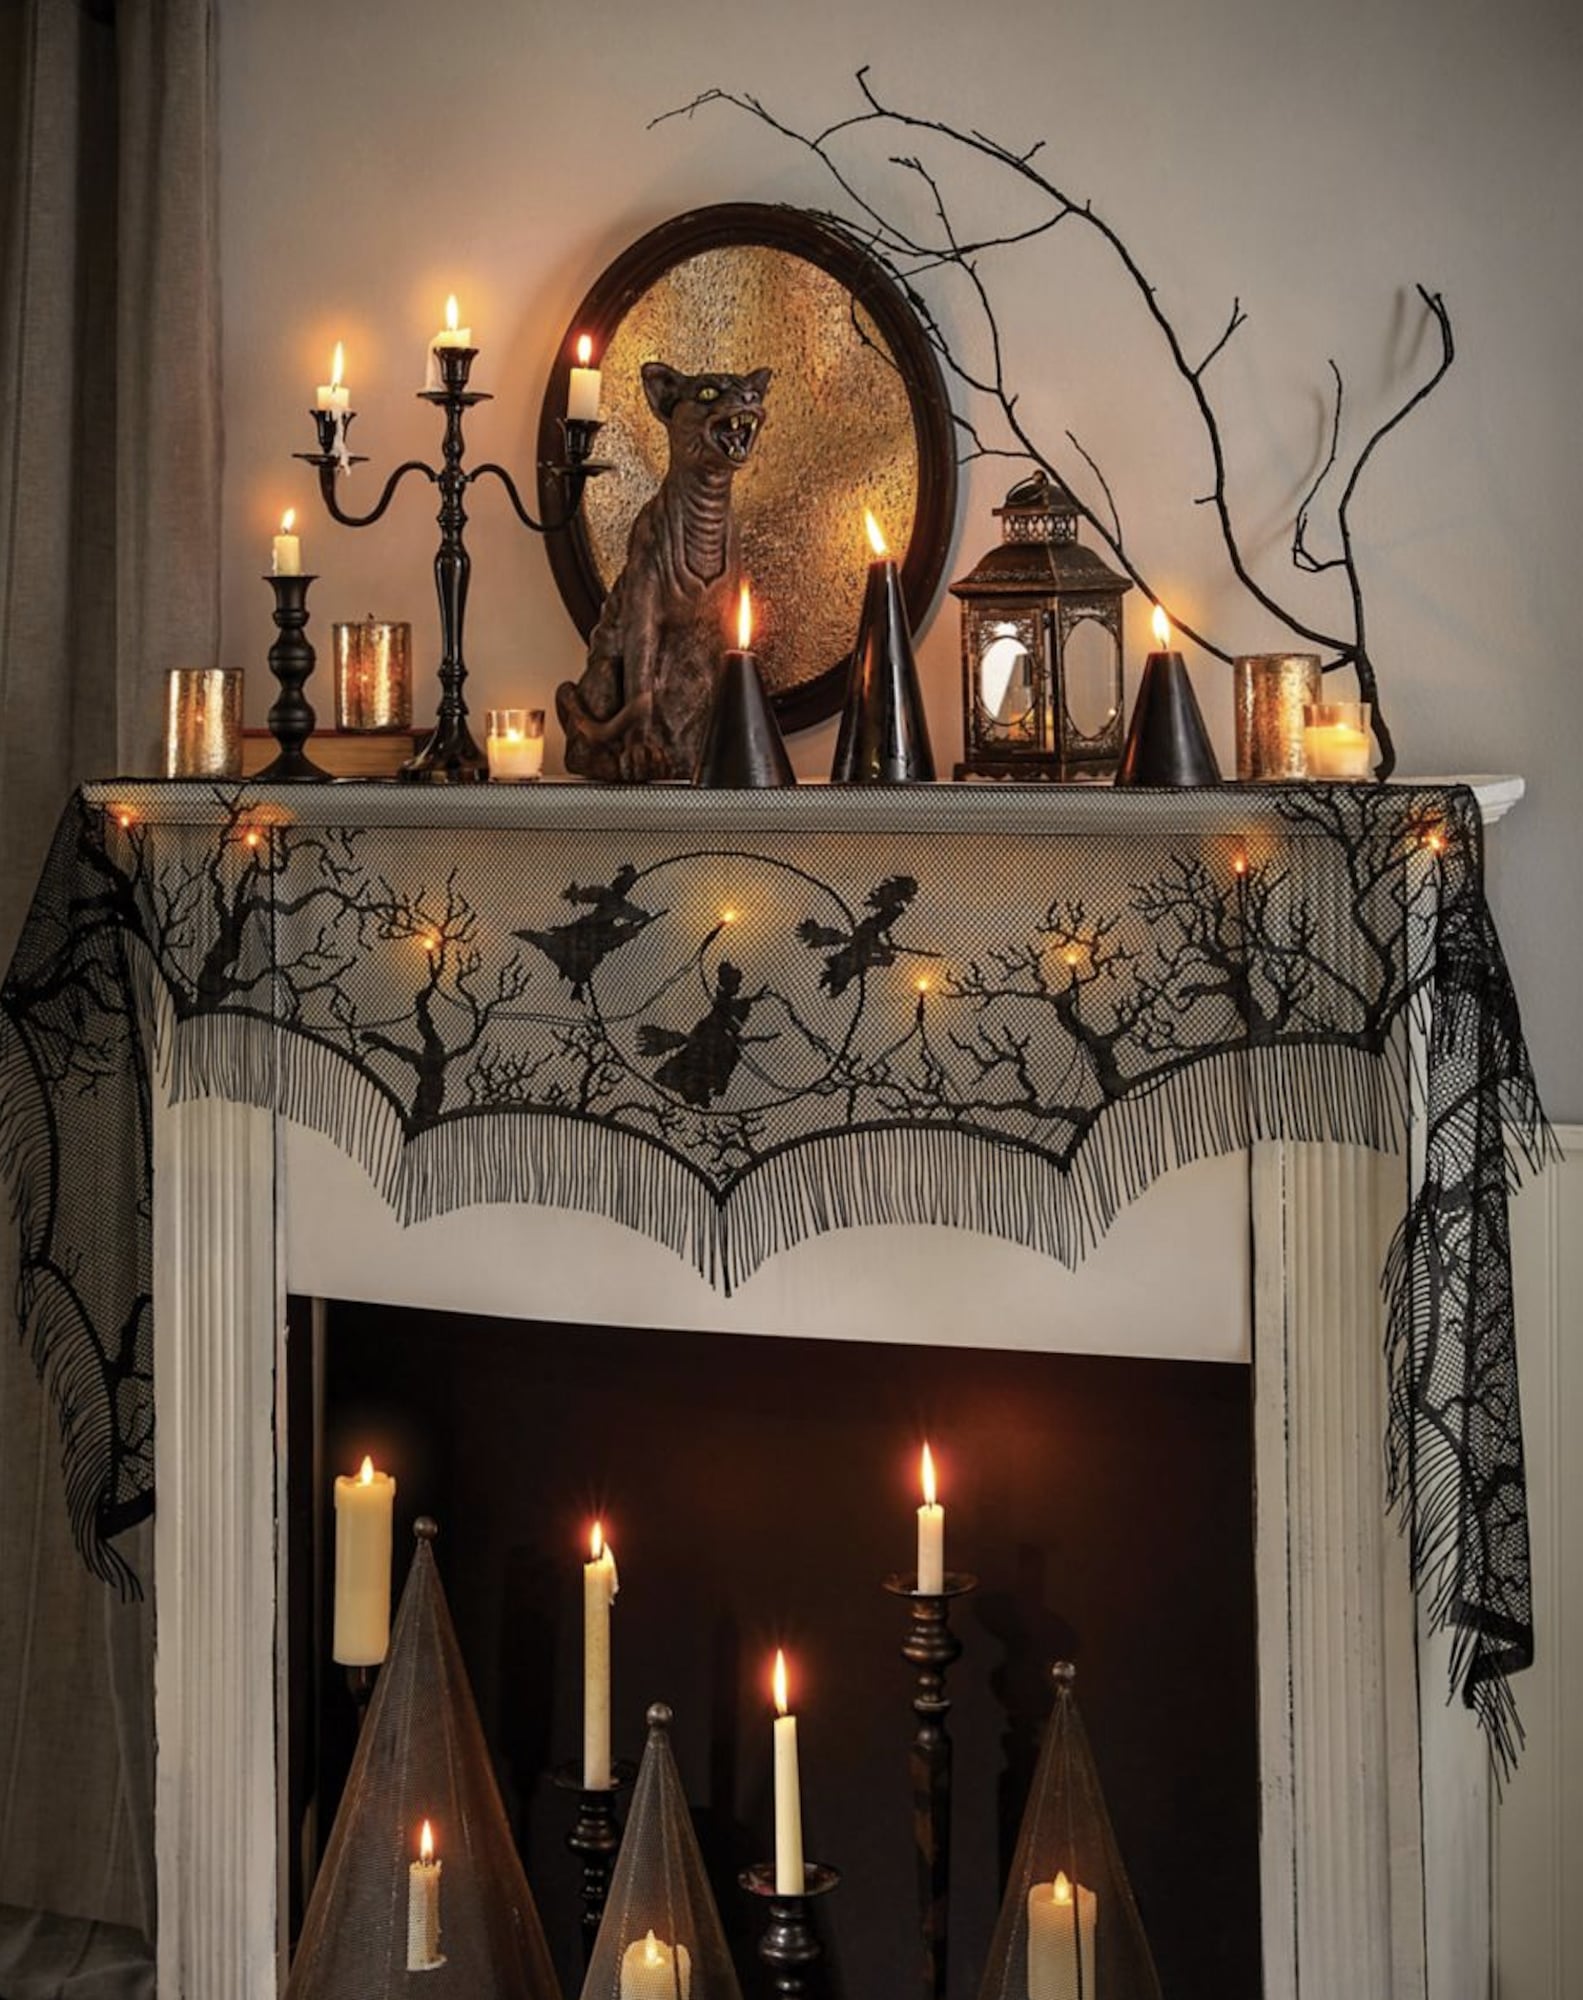 This Light-Up Hocus Pocus Mantel Scarf Is Hauntingly Chic | POPSUGAR Home